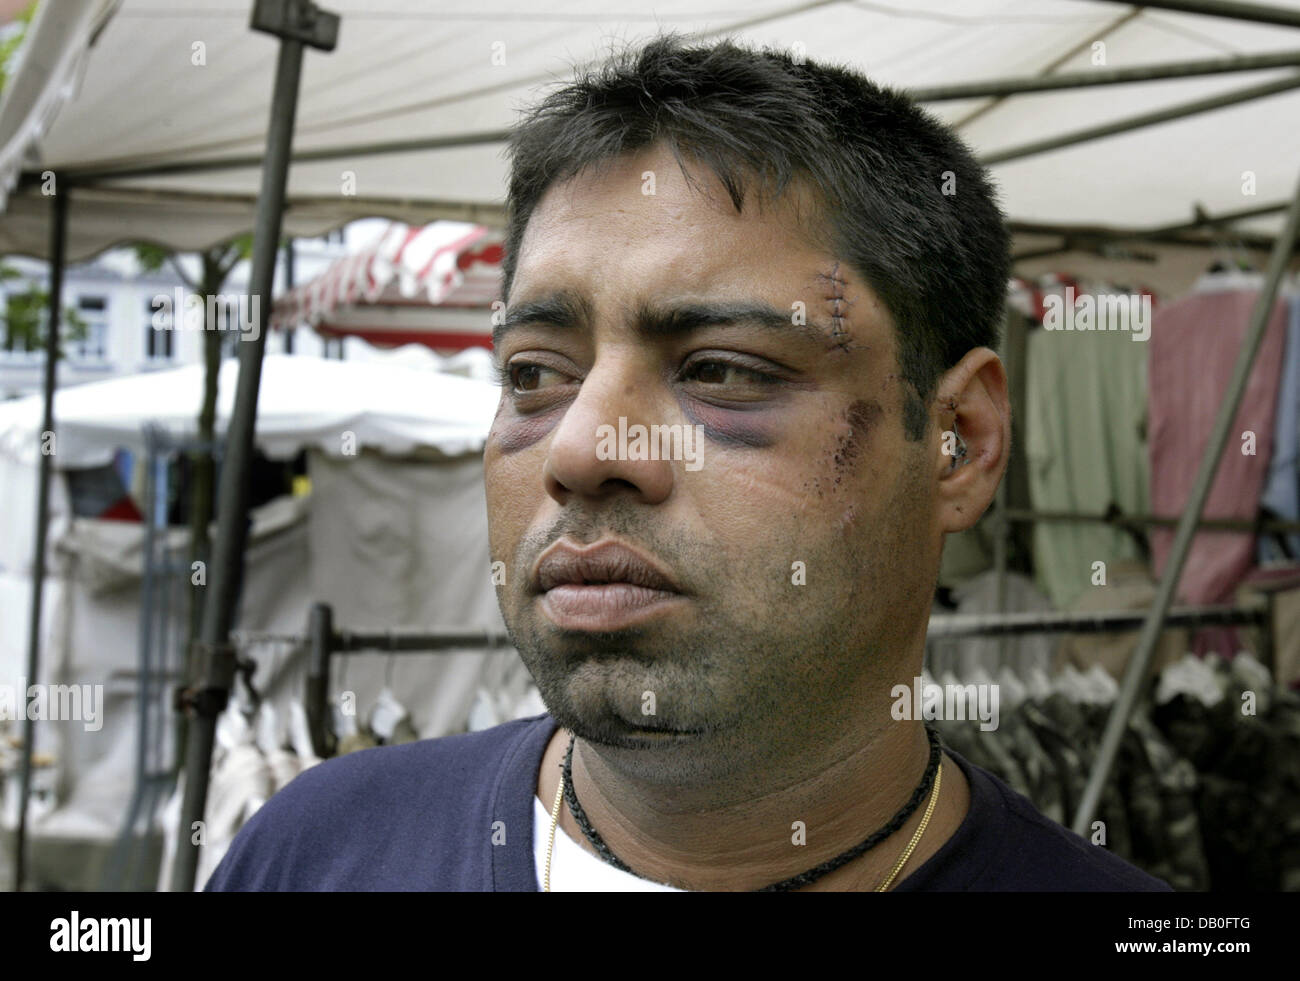 Singh Gurminder, one of eight vicitims of a chivy on Indian visitors of a town festivity, pose at a friend's booth of a weekly market in Doebeln, Germany, 22 August 2007. Around 50 young Germans chased and injured eight Indians after an argument in Muegeln sunday night (19 August). Photo: Waltraud Grubitzsch Stock Photo